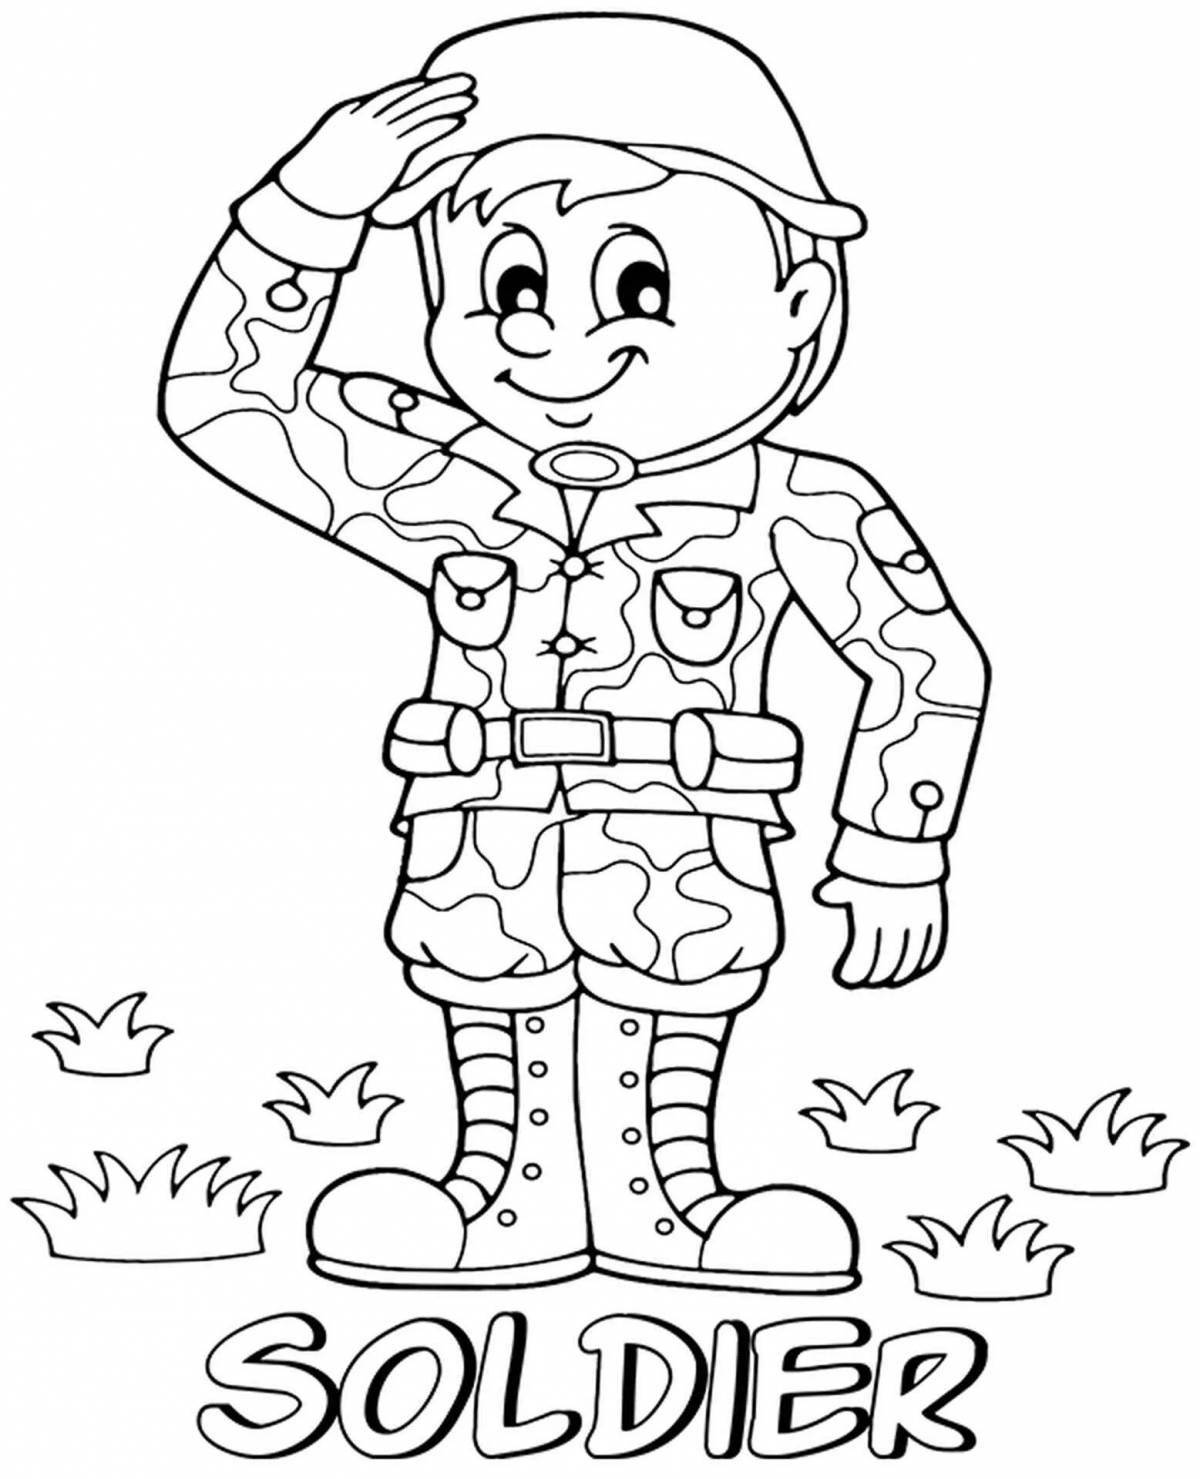 Coloring funny soldier